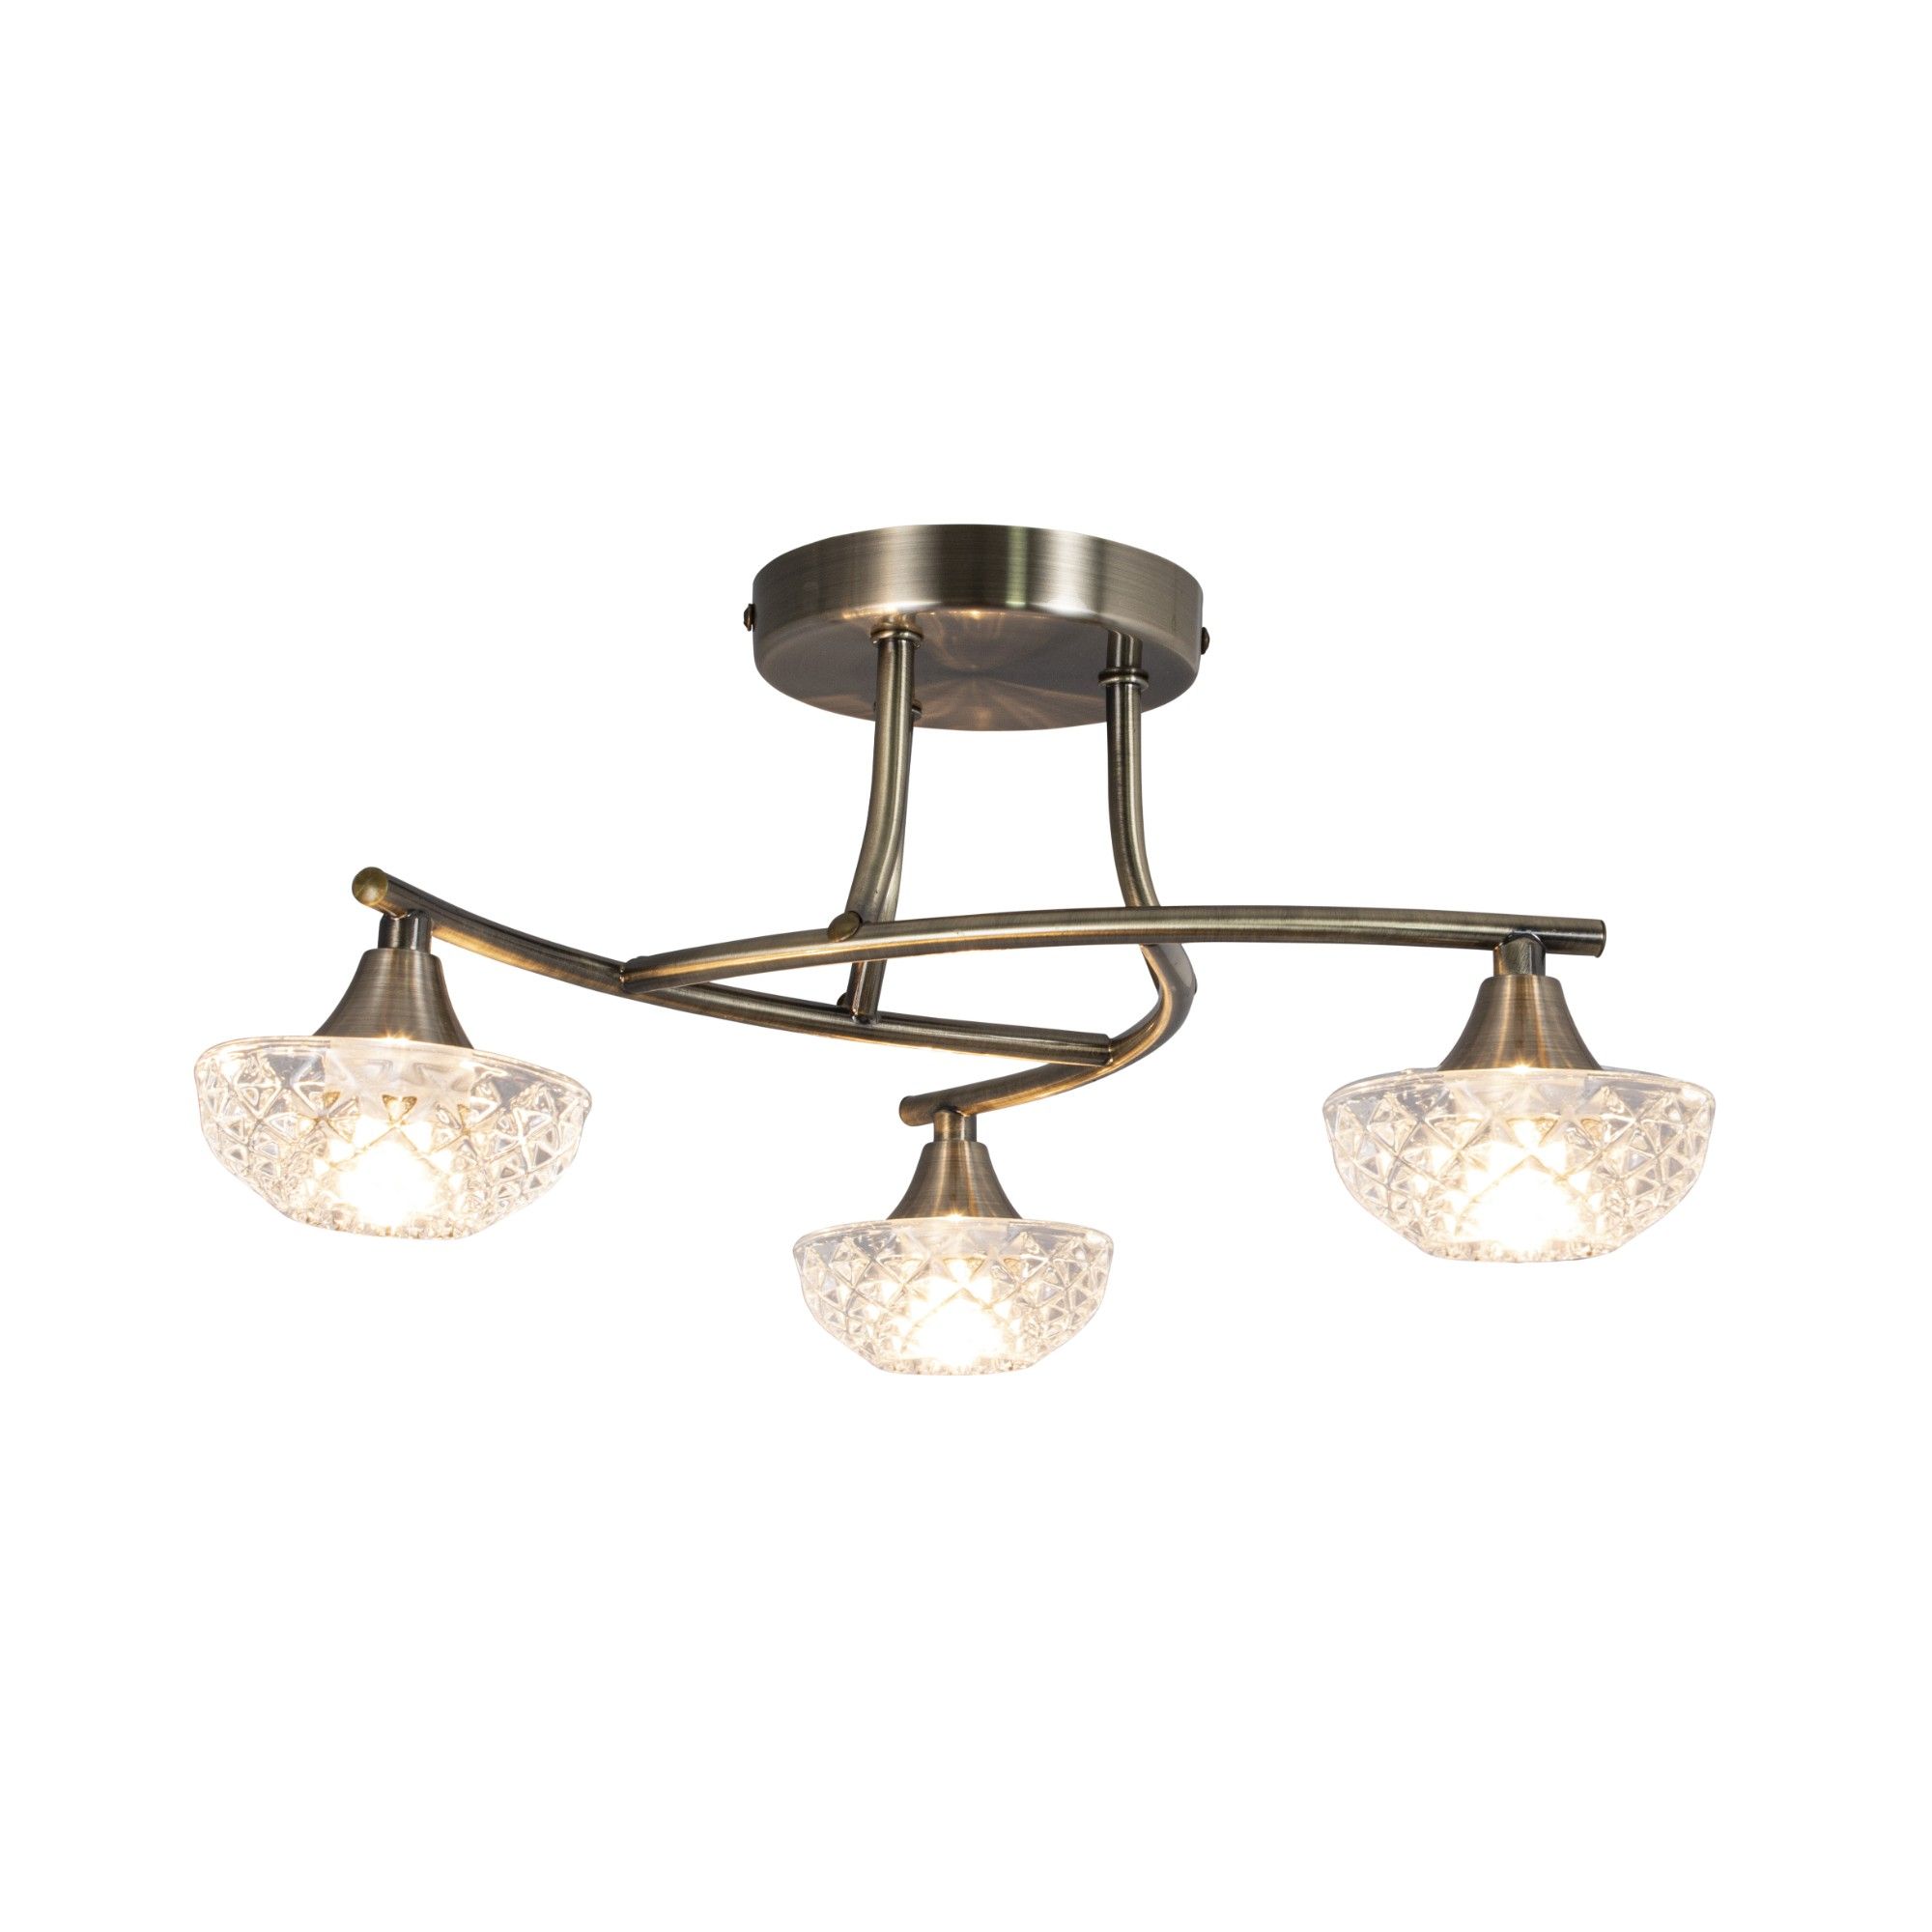 The Paine 3 Light Semi-Flush Ceiling Light is a stunning fitting from Pagazzi Lighting. Boasting an antique brass finish throughout, the piece features a round ceiling plate with 3 curved arms attached. Completing the piece is half dome, clear cut glass shades which illuminate beautifully. Feature this antique brass ceiling light in living rooms and hallways for a classic look. Pagazzi Exclusive
Height: 18.5cm
Diameter: 40cm
Dimmable: Yes 
Maximum Wattage: 28w 
Light Bulb: 3 x G9 Capsule Light Bulbs (Not Included)